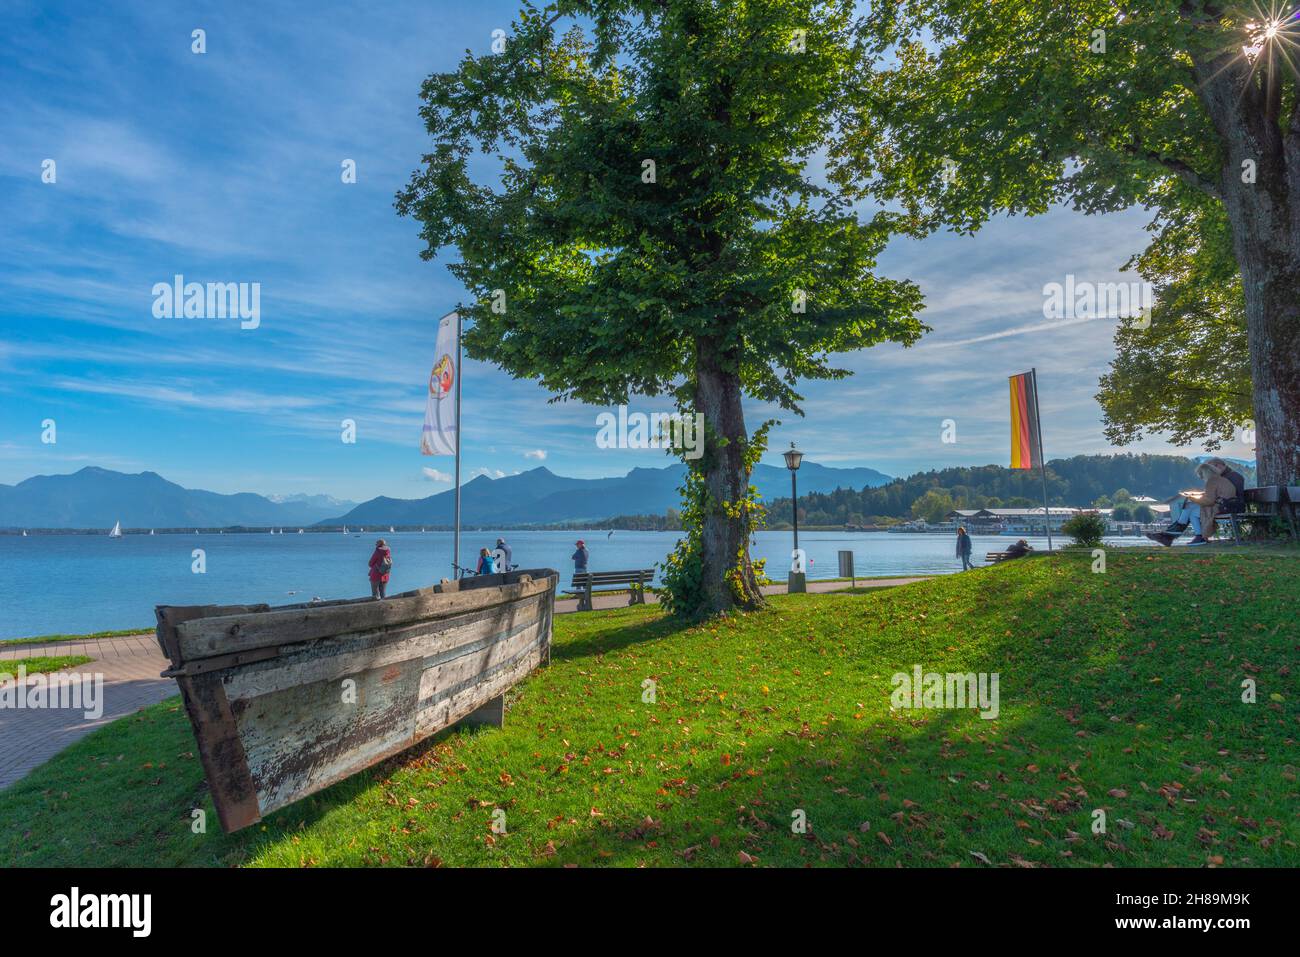 Prien town on Lake Chiemsee in the prealpine plateau Chiemgau, lake and the Alps, Upper Bavaria, Southern Germany, Europe Stock Photo